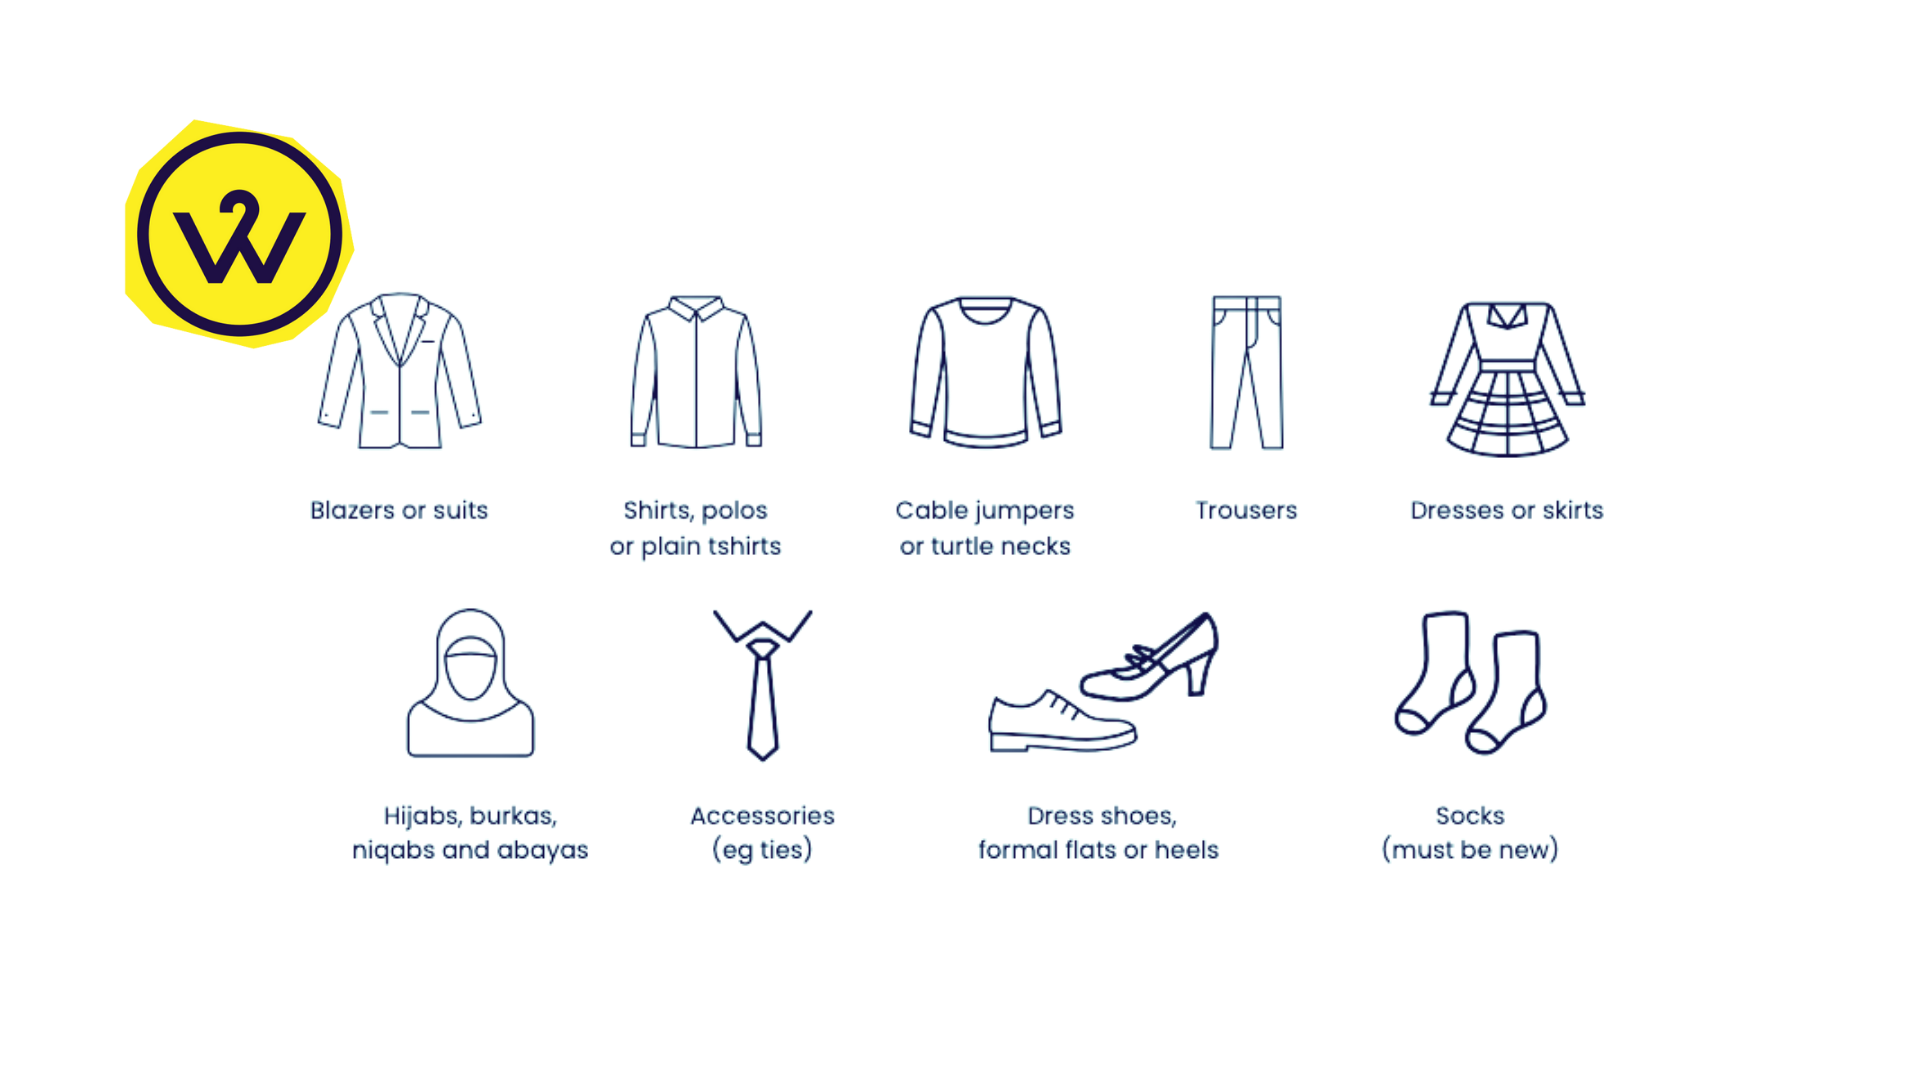 Image to show clothing that Moxie is collecting. Images to show blazers, suits, shirts, trouser and more.